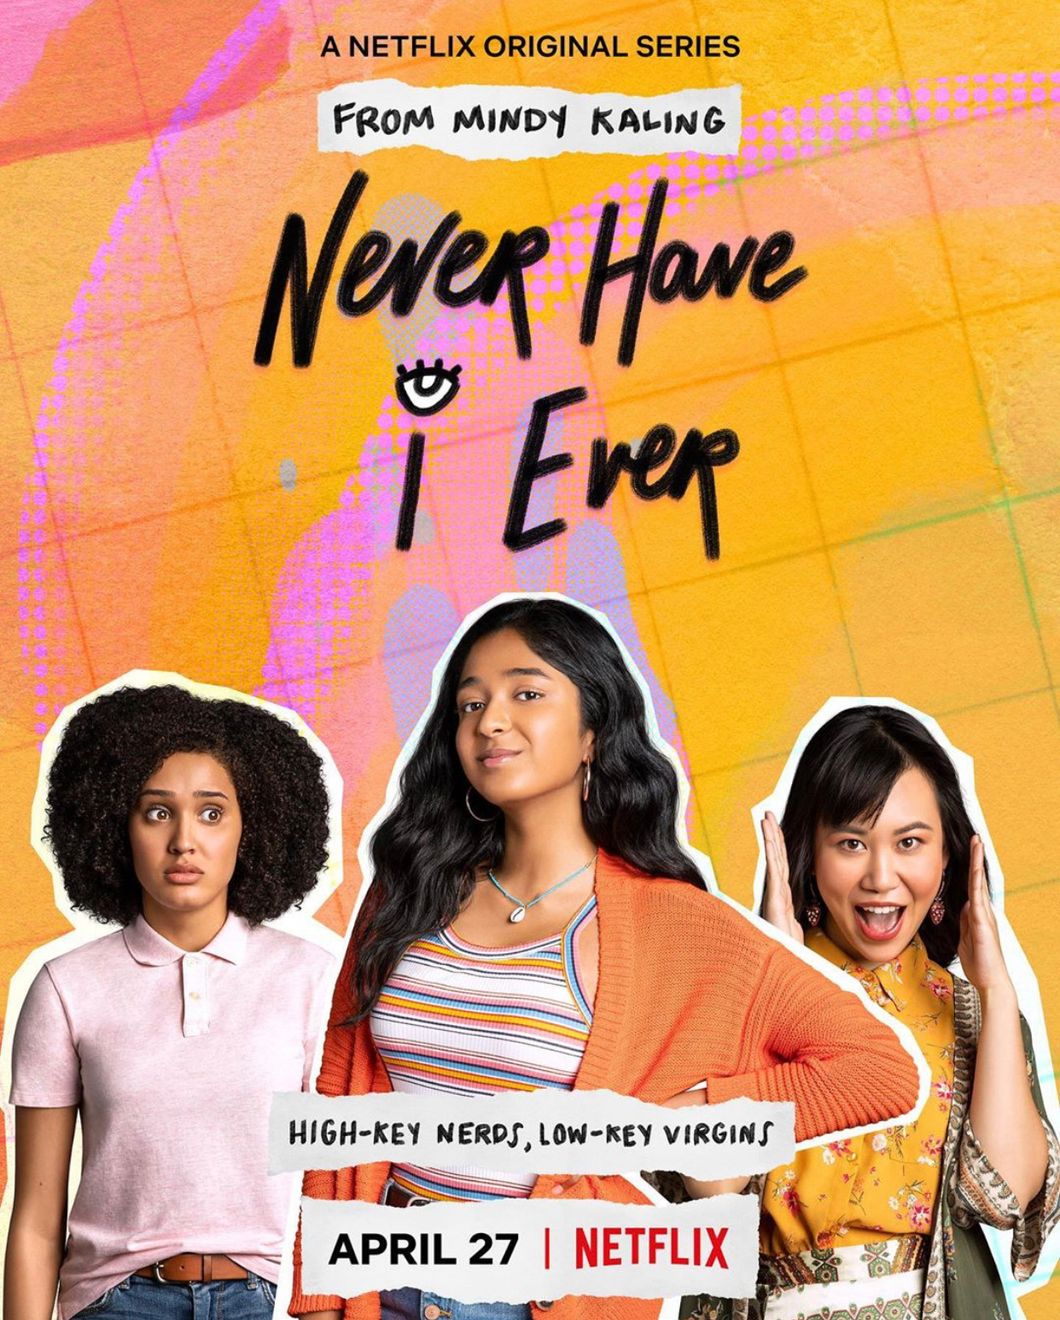 Lee Rodriguez, Maitreyi Ramakrishnan and Ramona Young play best friends in Netflix’s “Never Have I Ever”